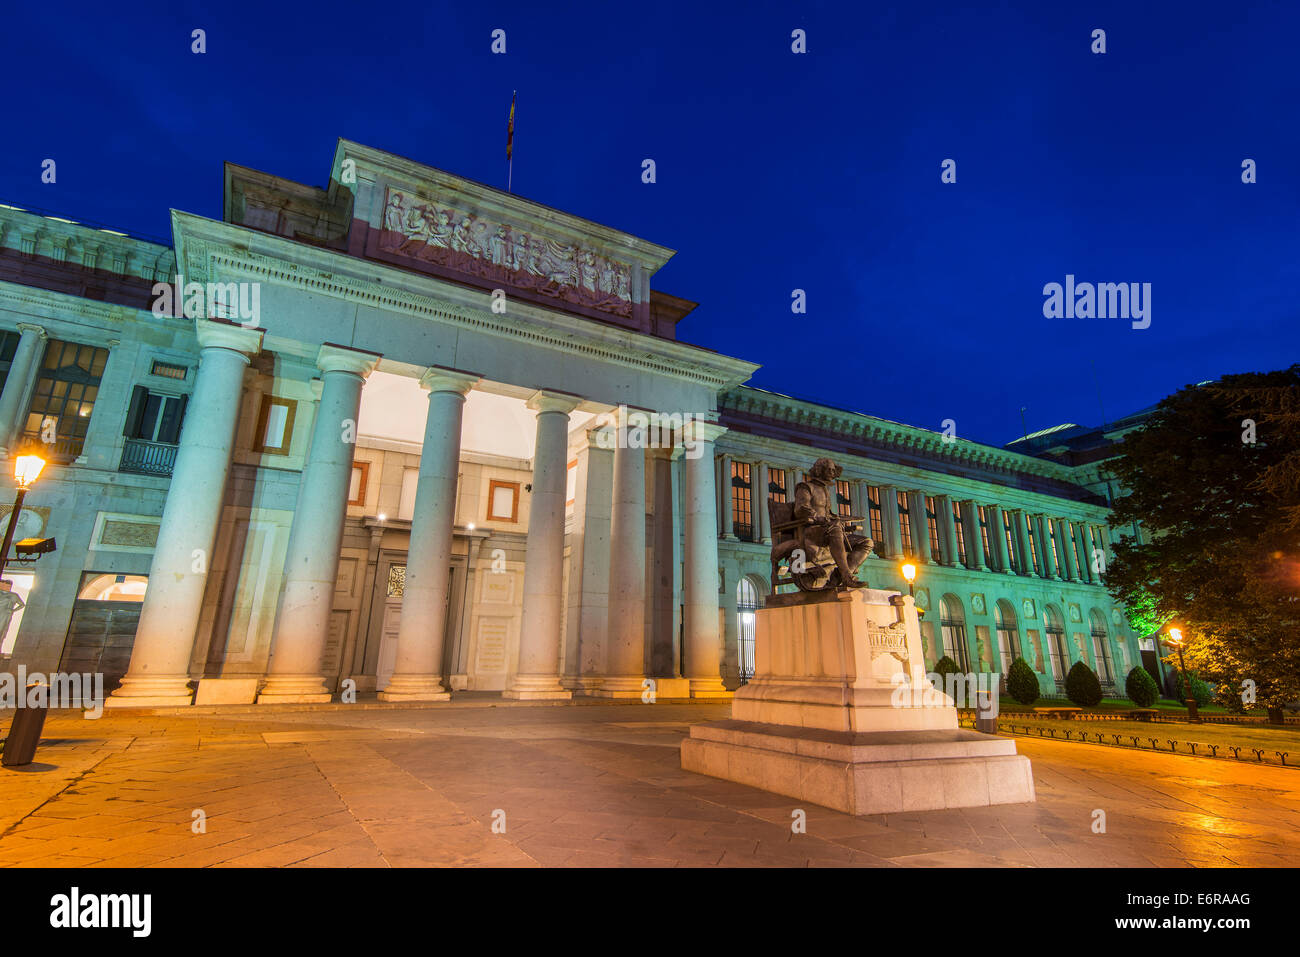 Night view of the facade of Museo del Prado with bronze statue of spanish painter Diego Velazquez, Madrid, Spain Stock Photo